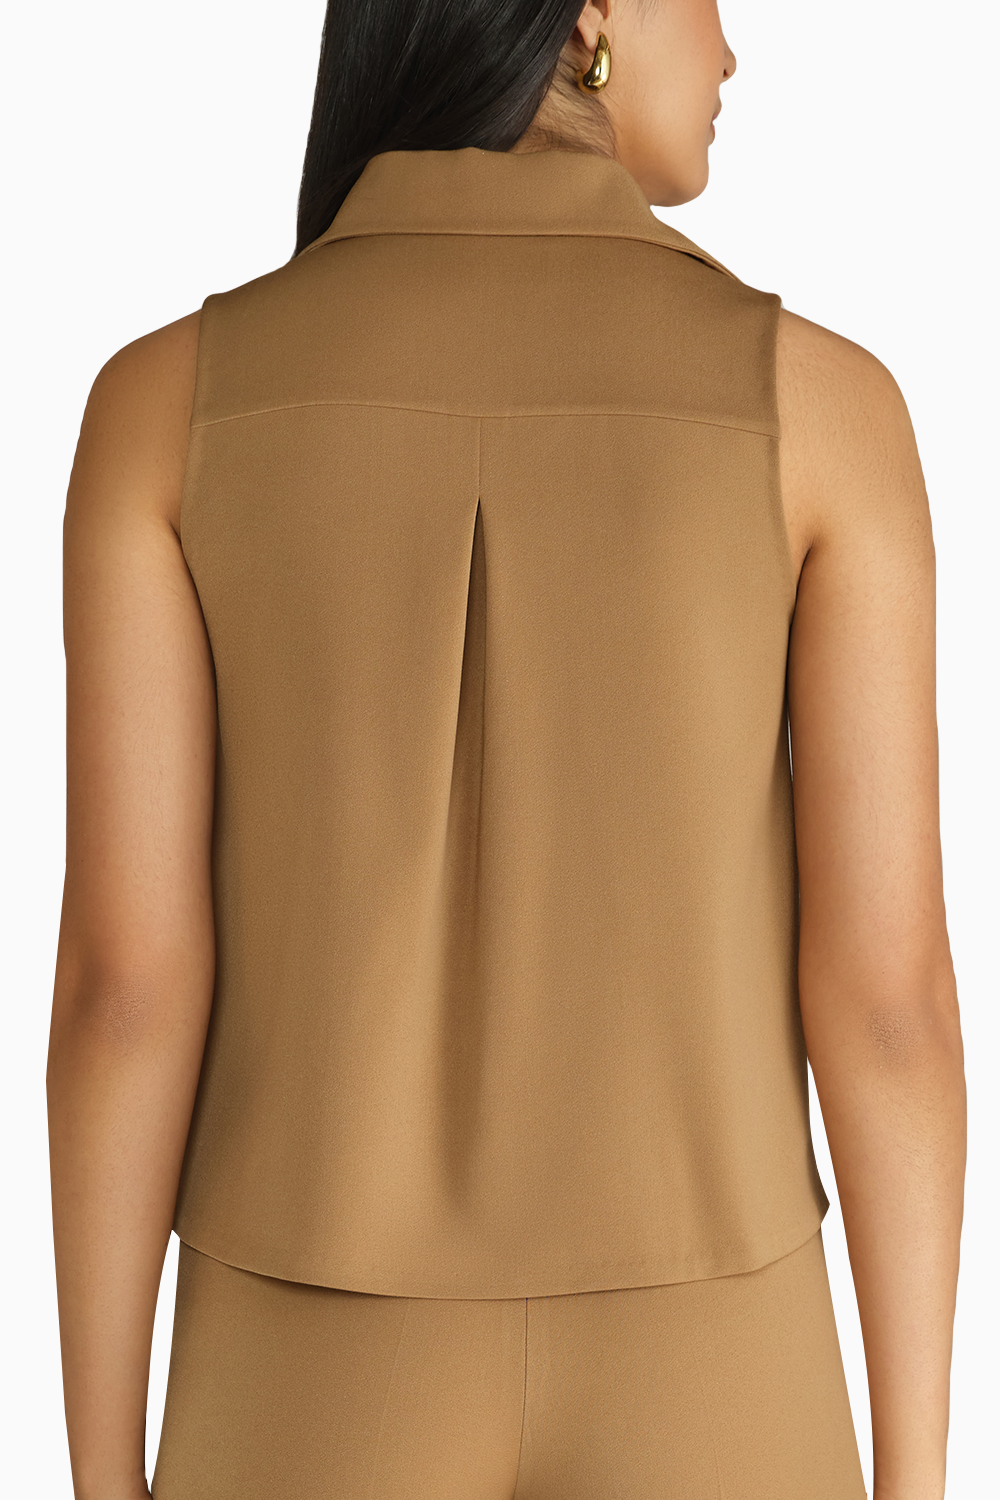 Camel Stretch Suiting Sleeveless Top